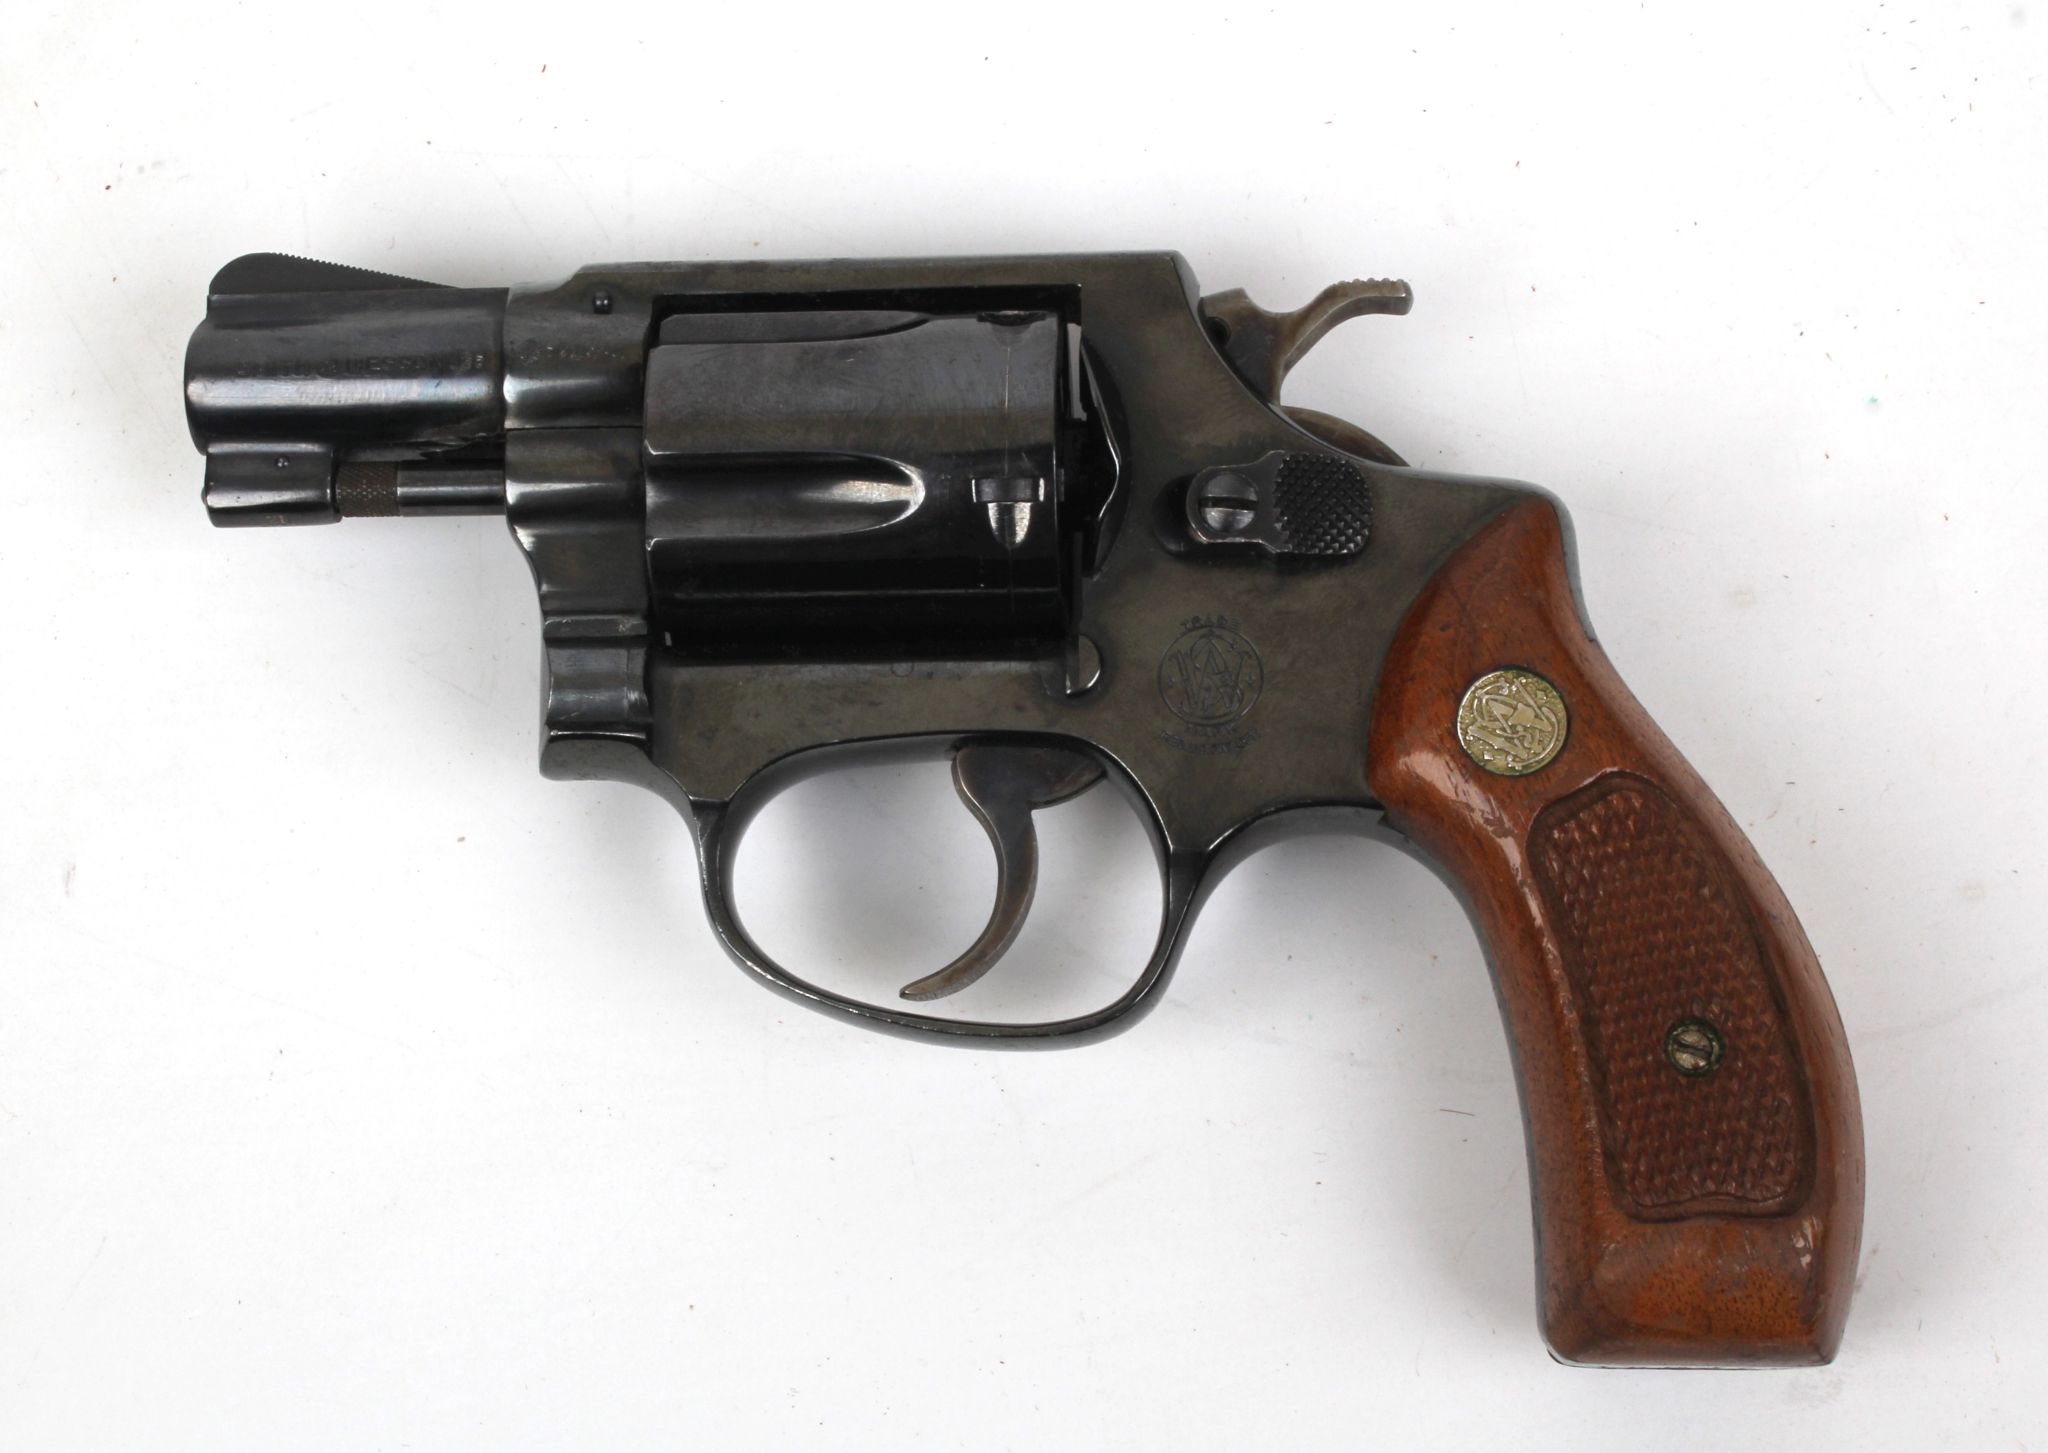 Smith And Wesson 38 Snub Nose Special Revolver De Activated Walnut Pistol Grip With Brass Roundel 3071